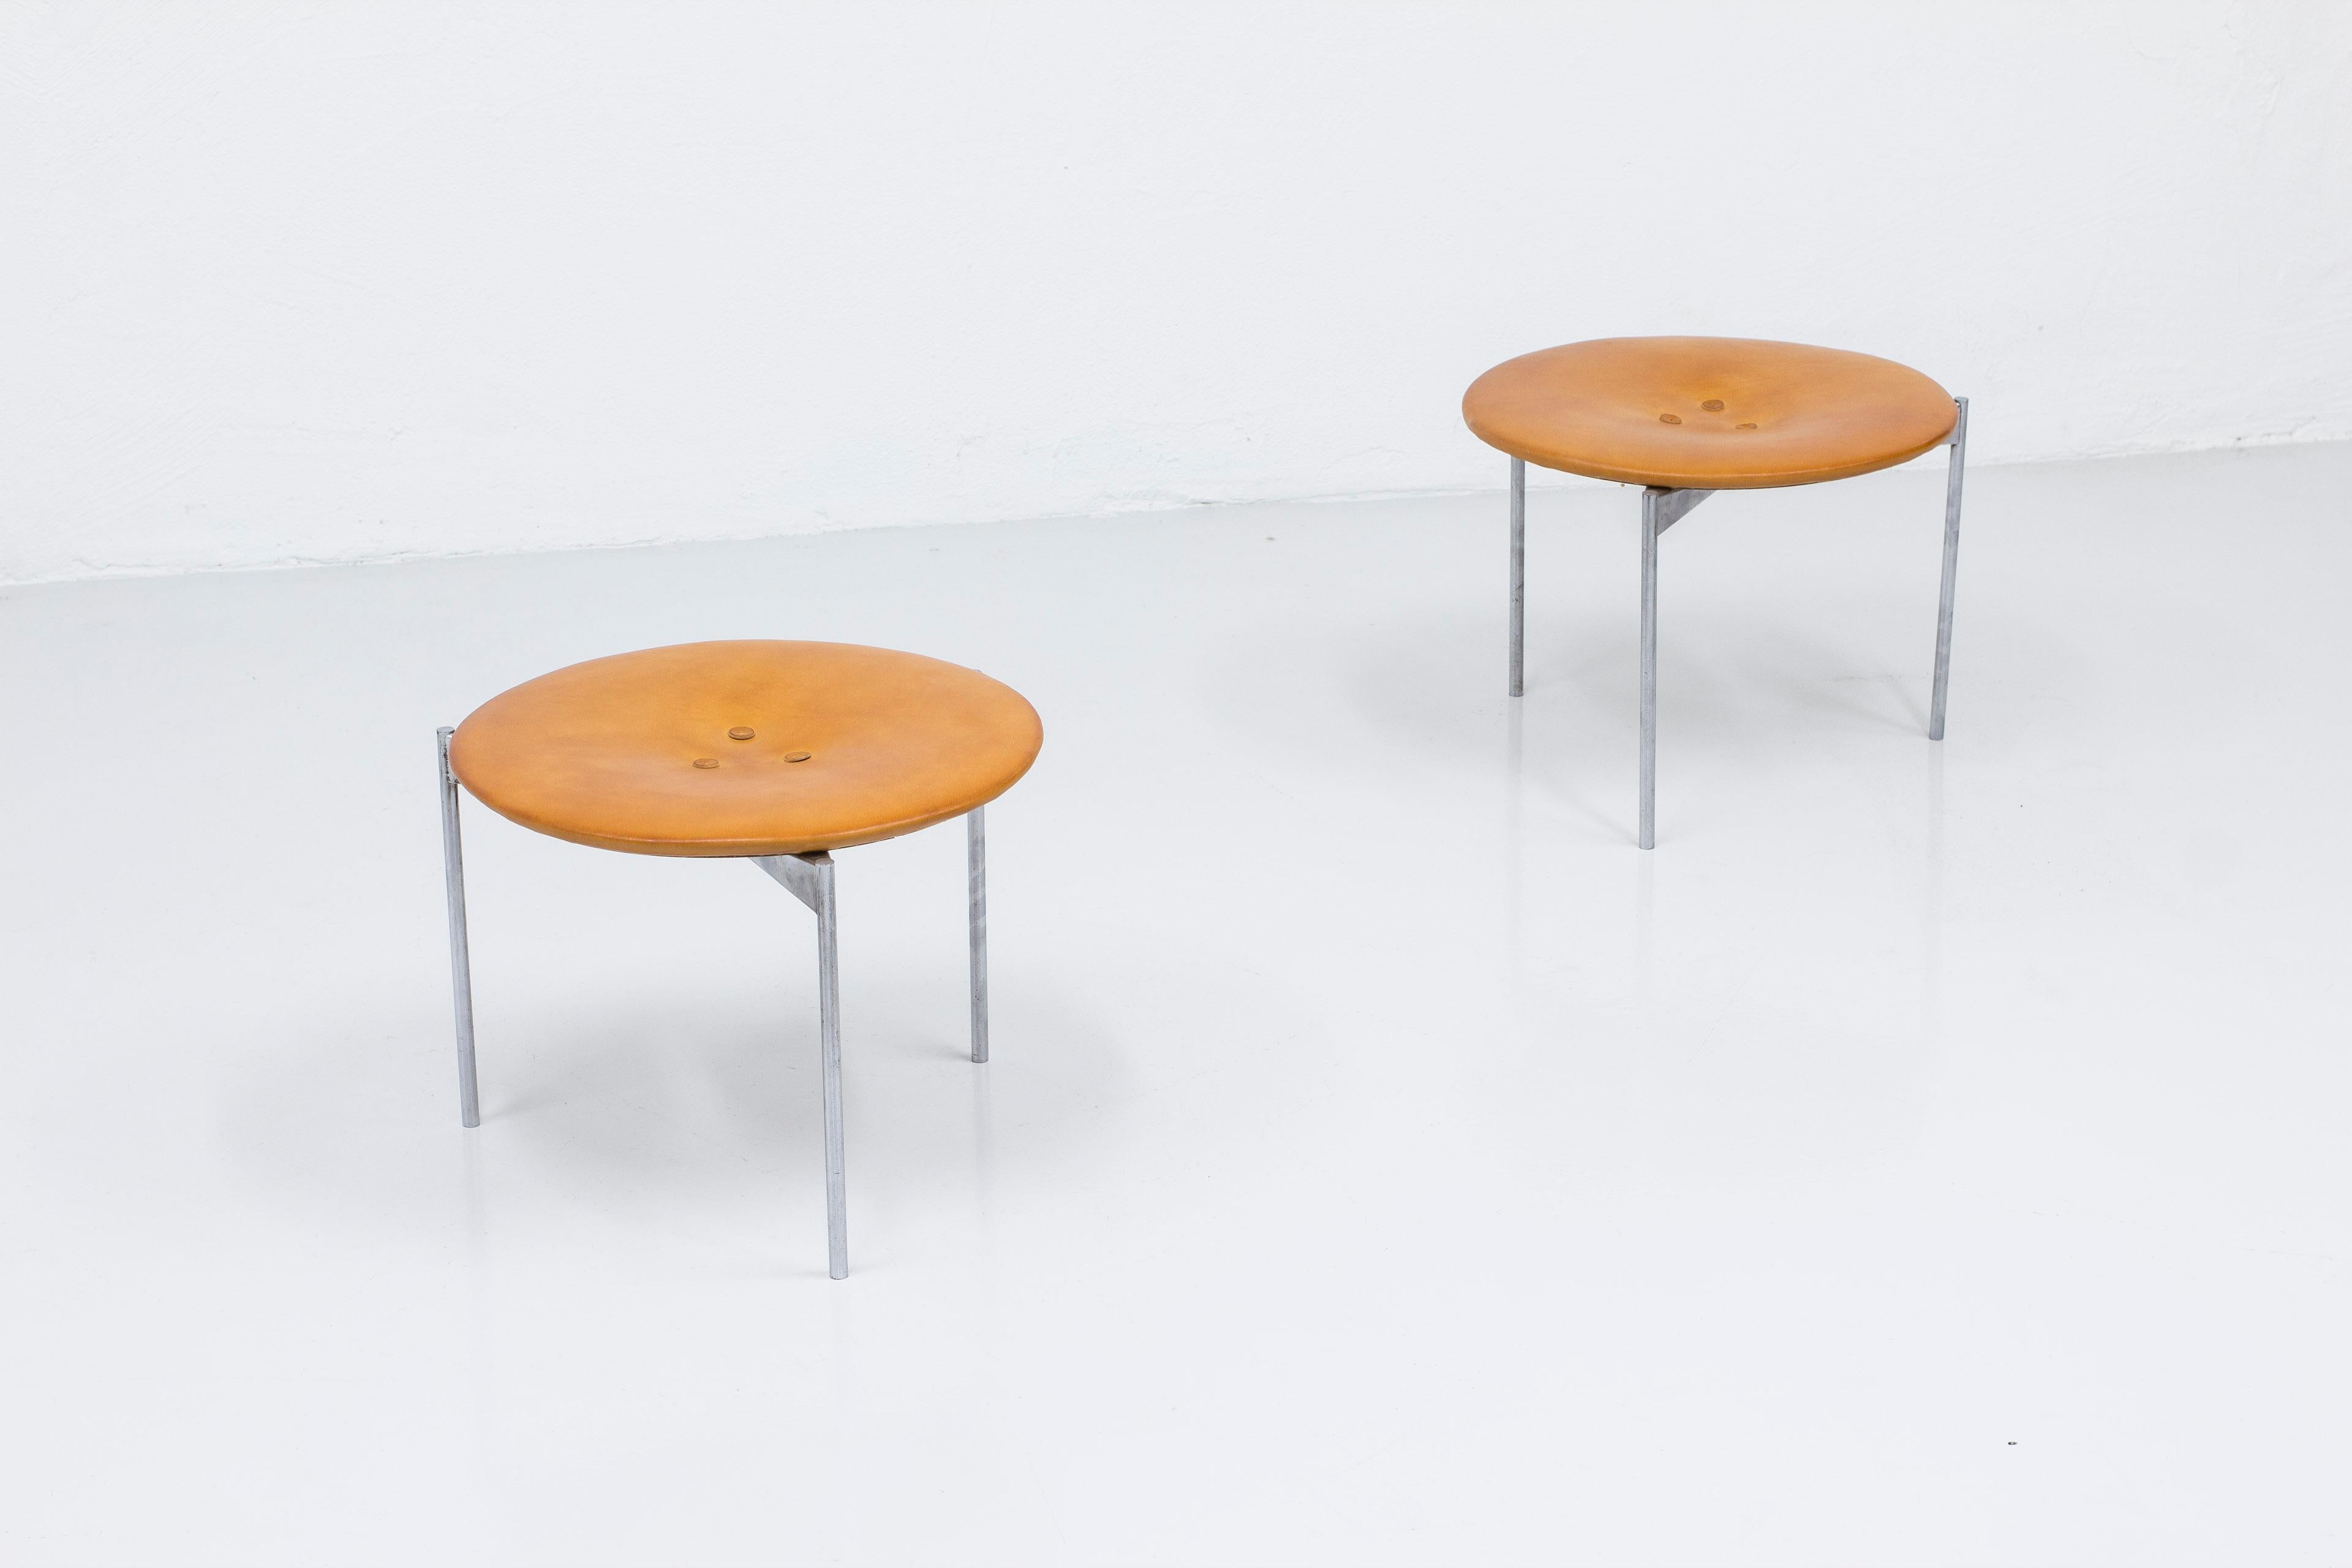 Patinated leather and Steel Stools by Uno & Östen Kristiansson, Sweden, 1960s For Sale 1